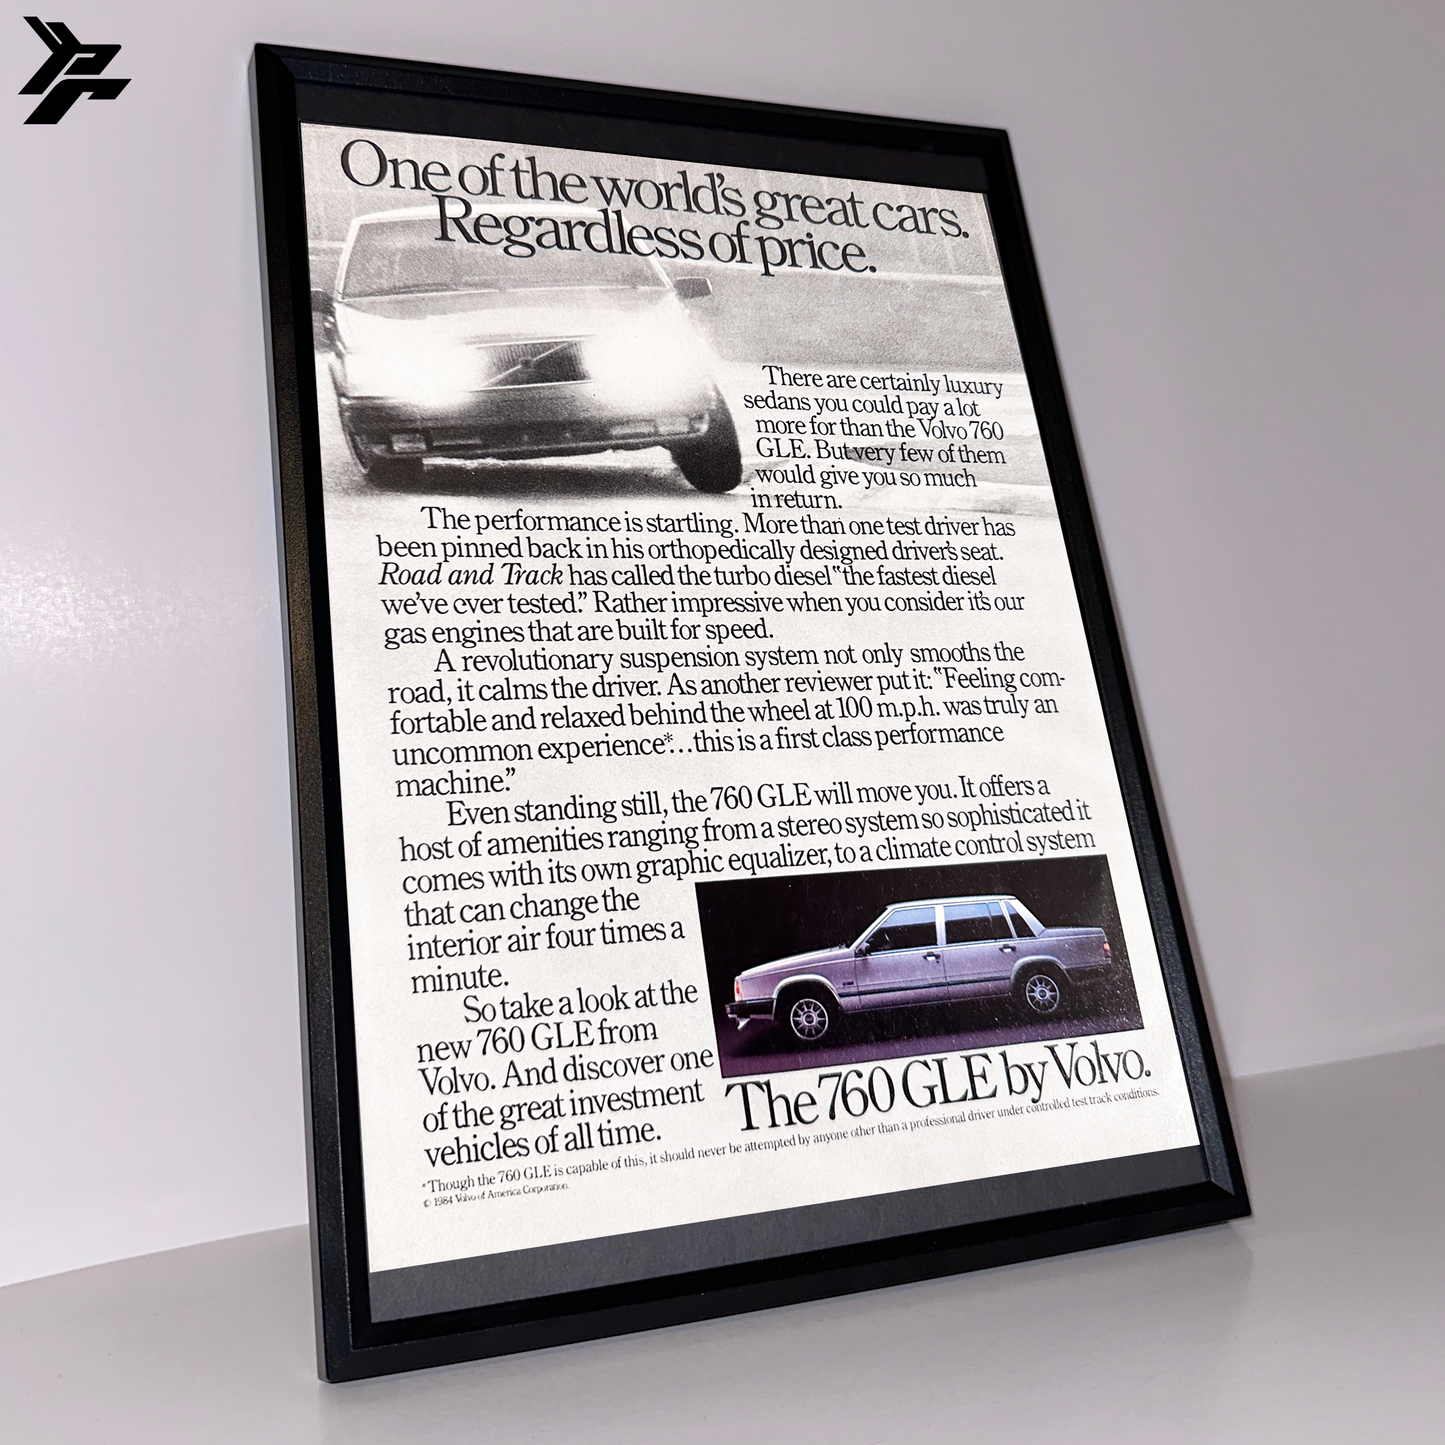 Volvo 760 great cars framed ad